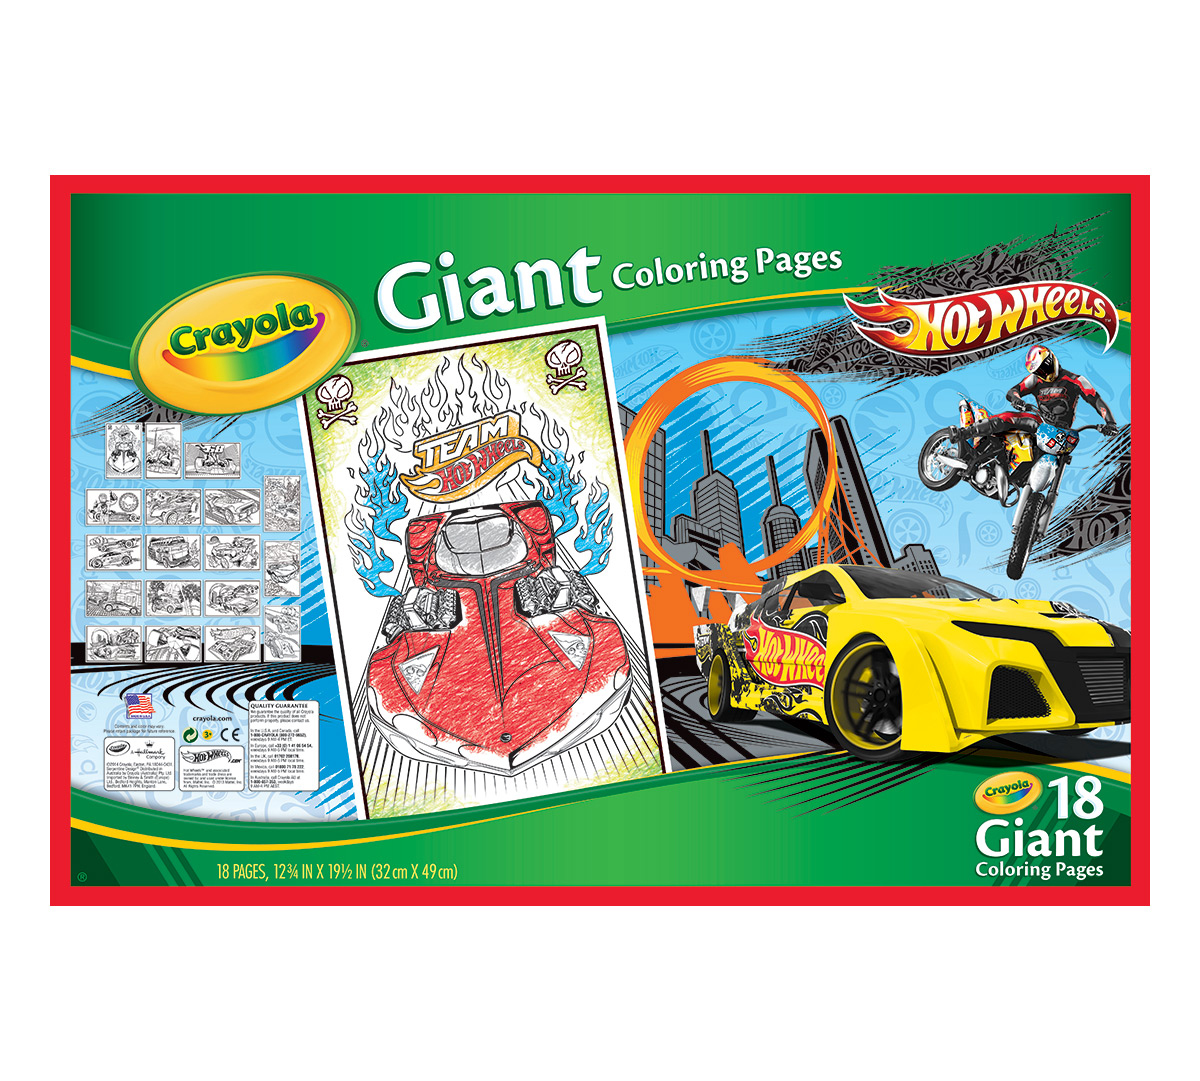 Giant Coloring Pages - Hot Wheels | Crayola